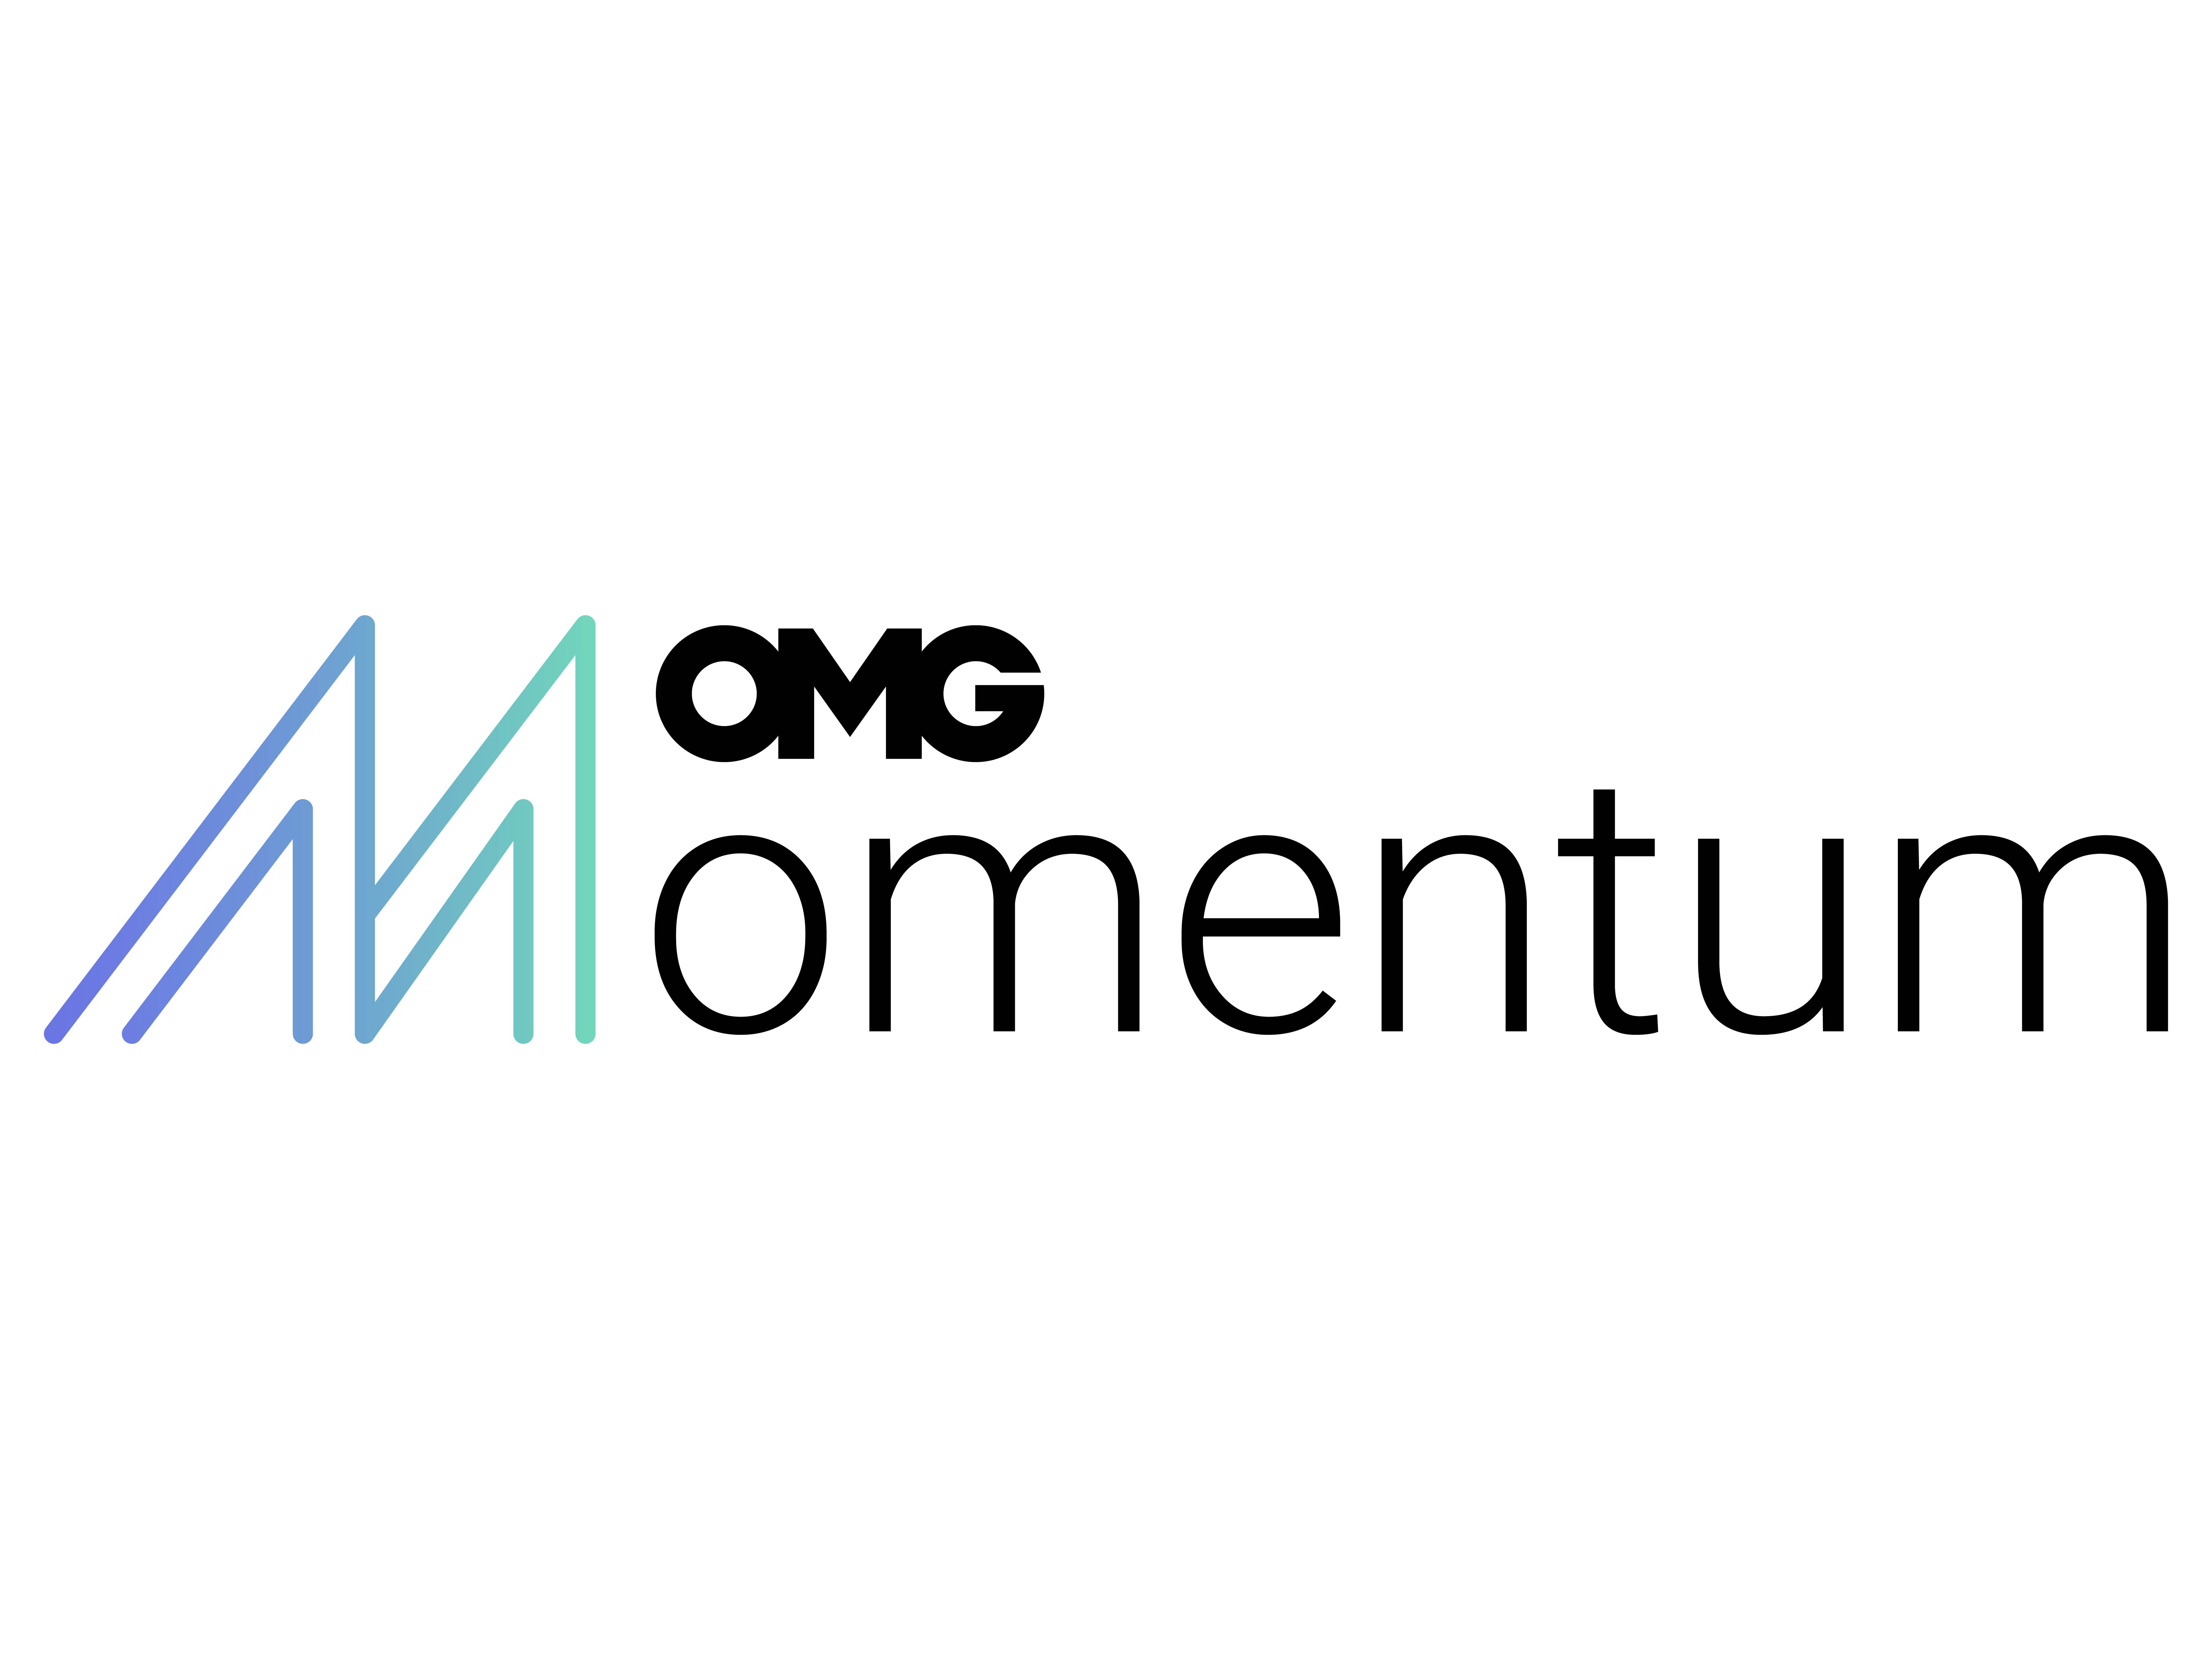 OMG MENA launches Momentum, its global ESG solution